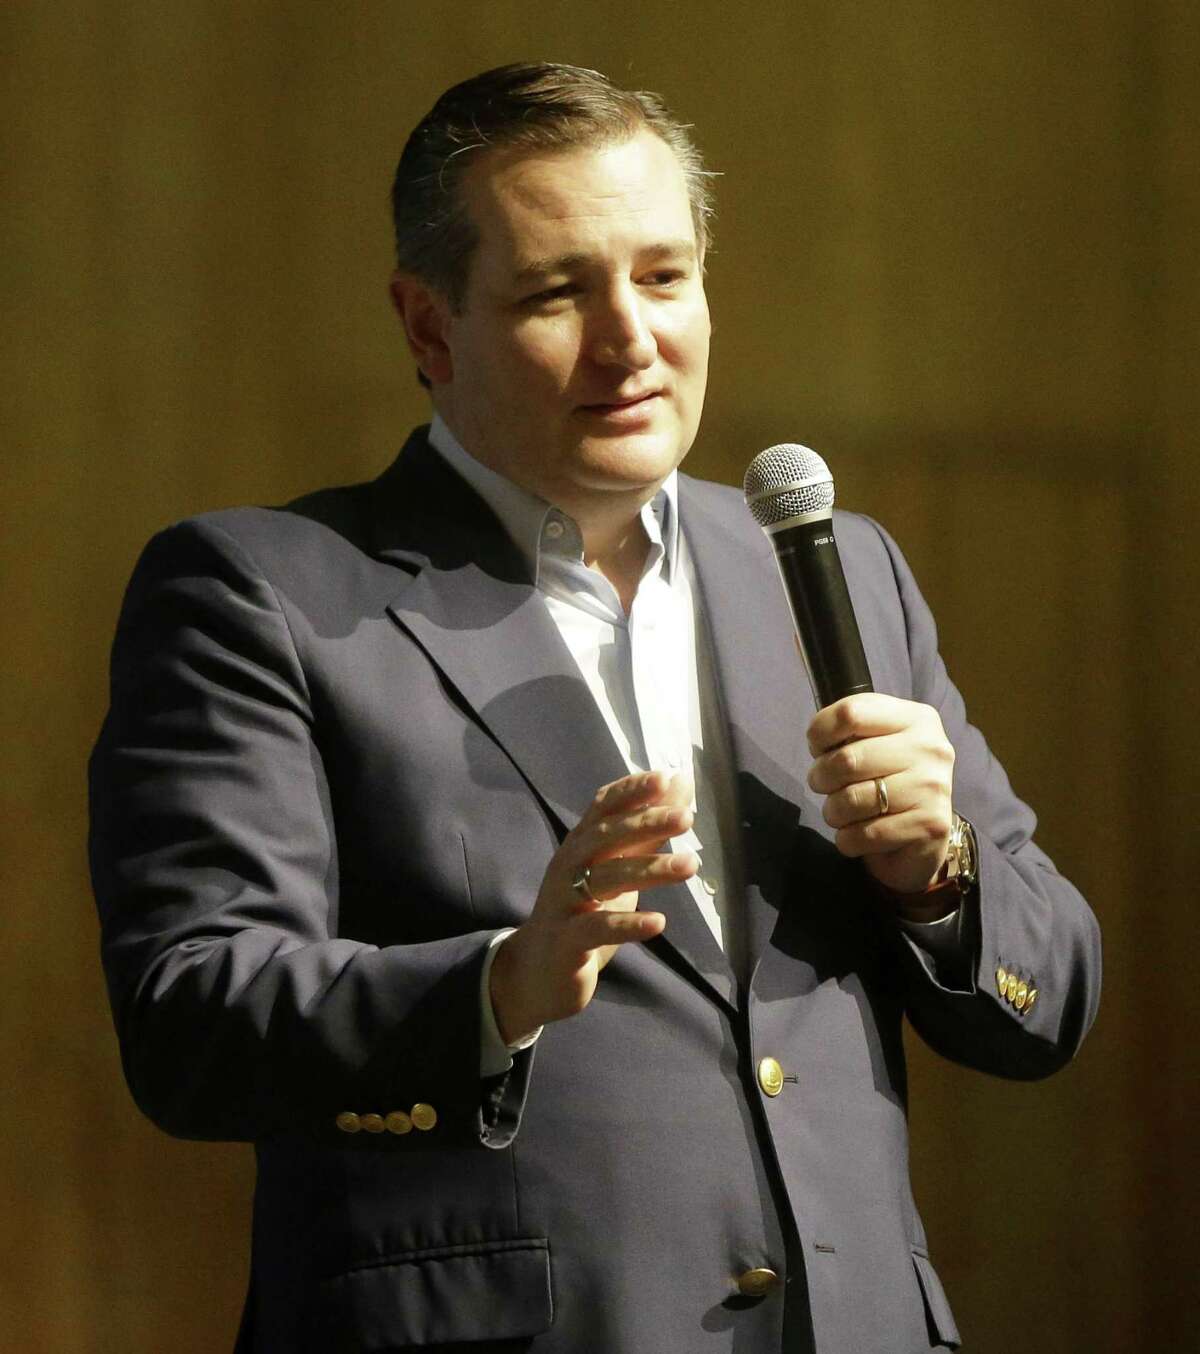 Sen. Ted Cruz speaks during the Day of Unity event held at Bellaire High School, 5100 Maple St., Sunday, March 25, 2018, in Houston. ( Melissa Phillip / Houston Chronicle )